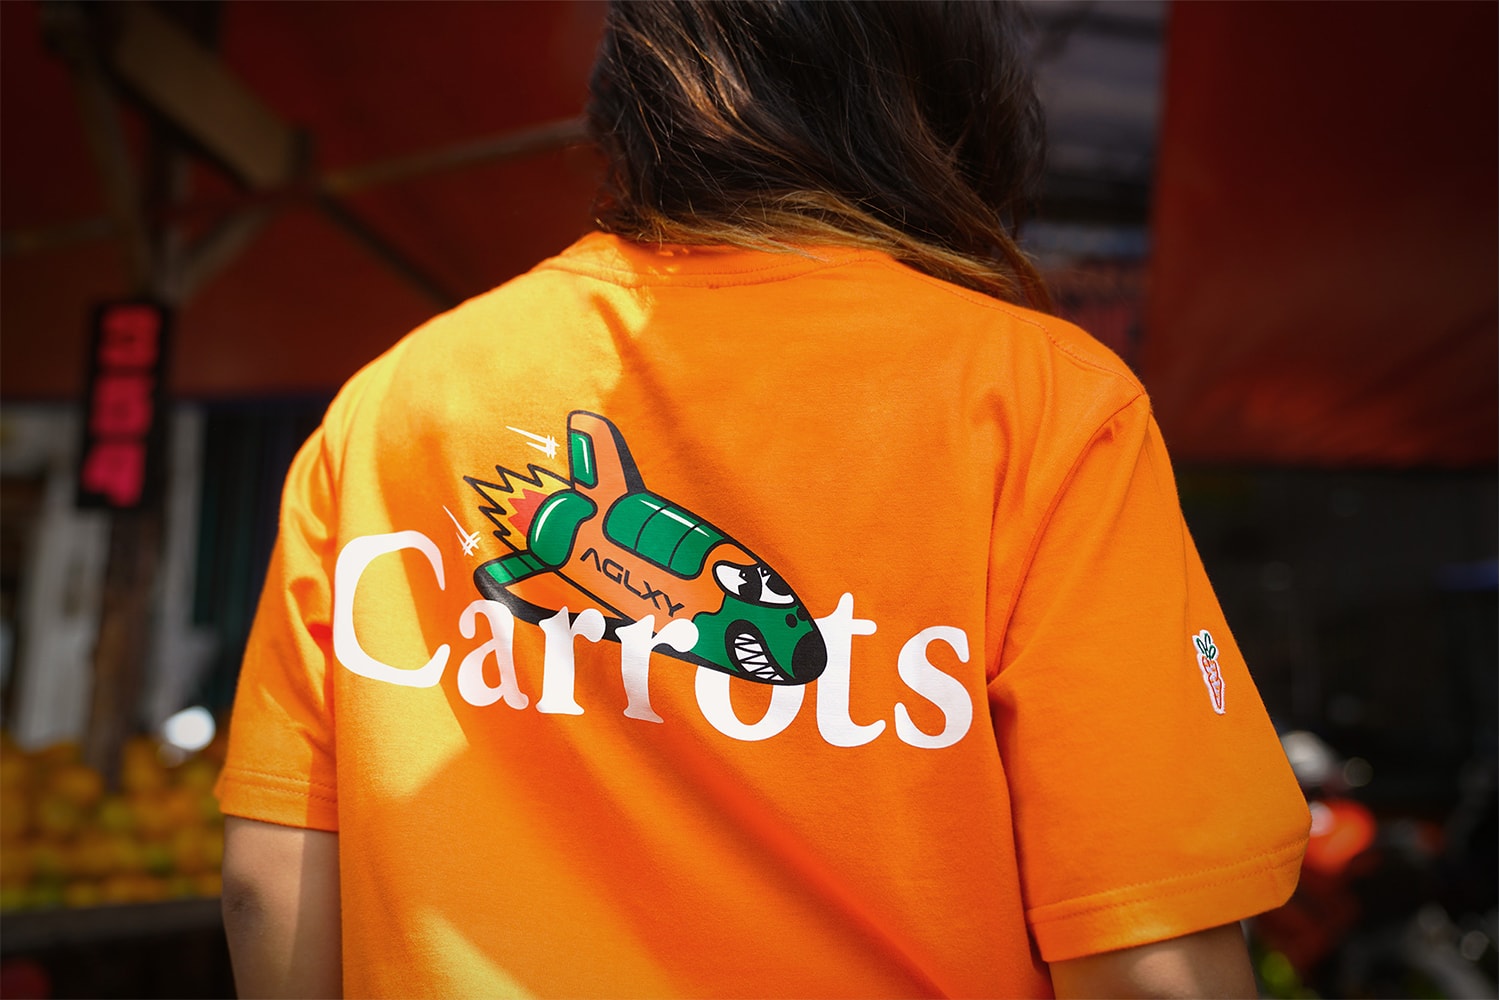 AGLXY Carrots by Anwar Carrots Collection Release Info Date Buy Price Ageless Galaxy